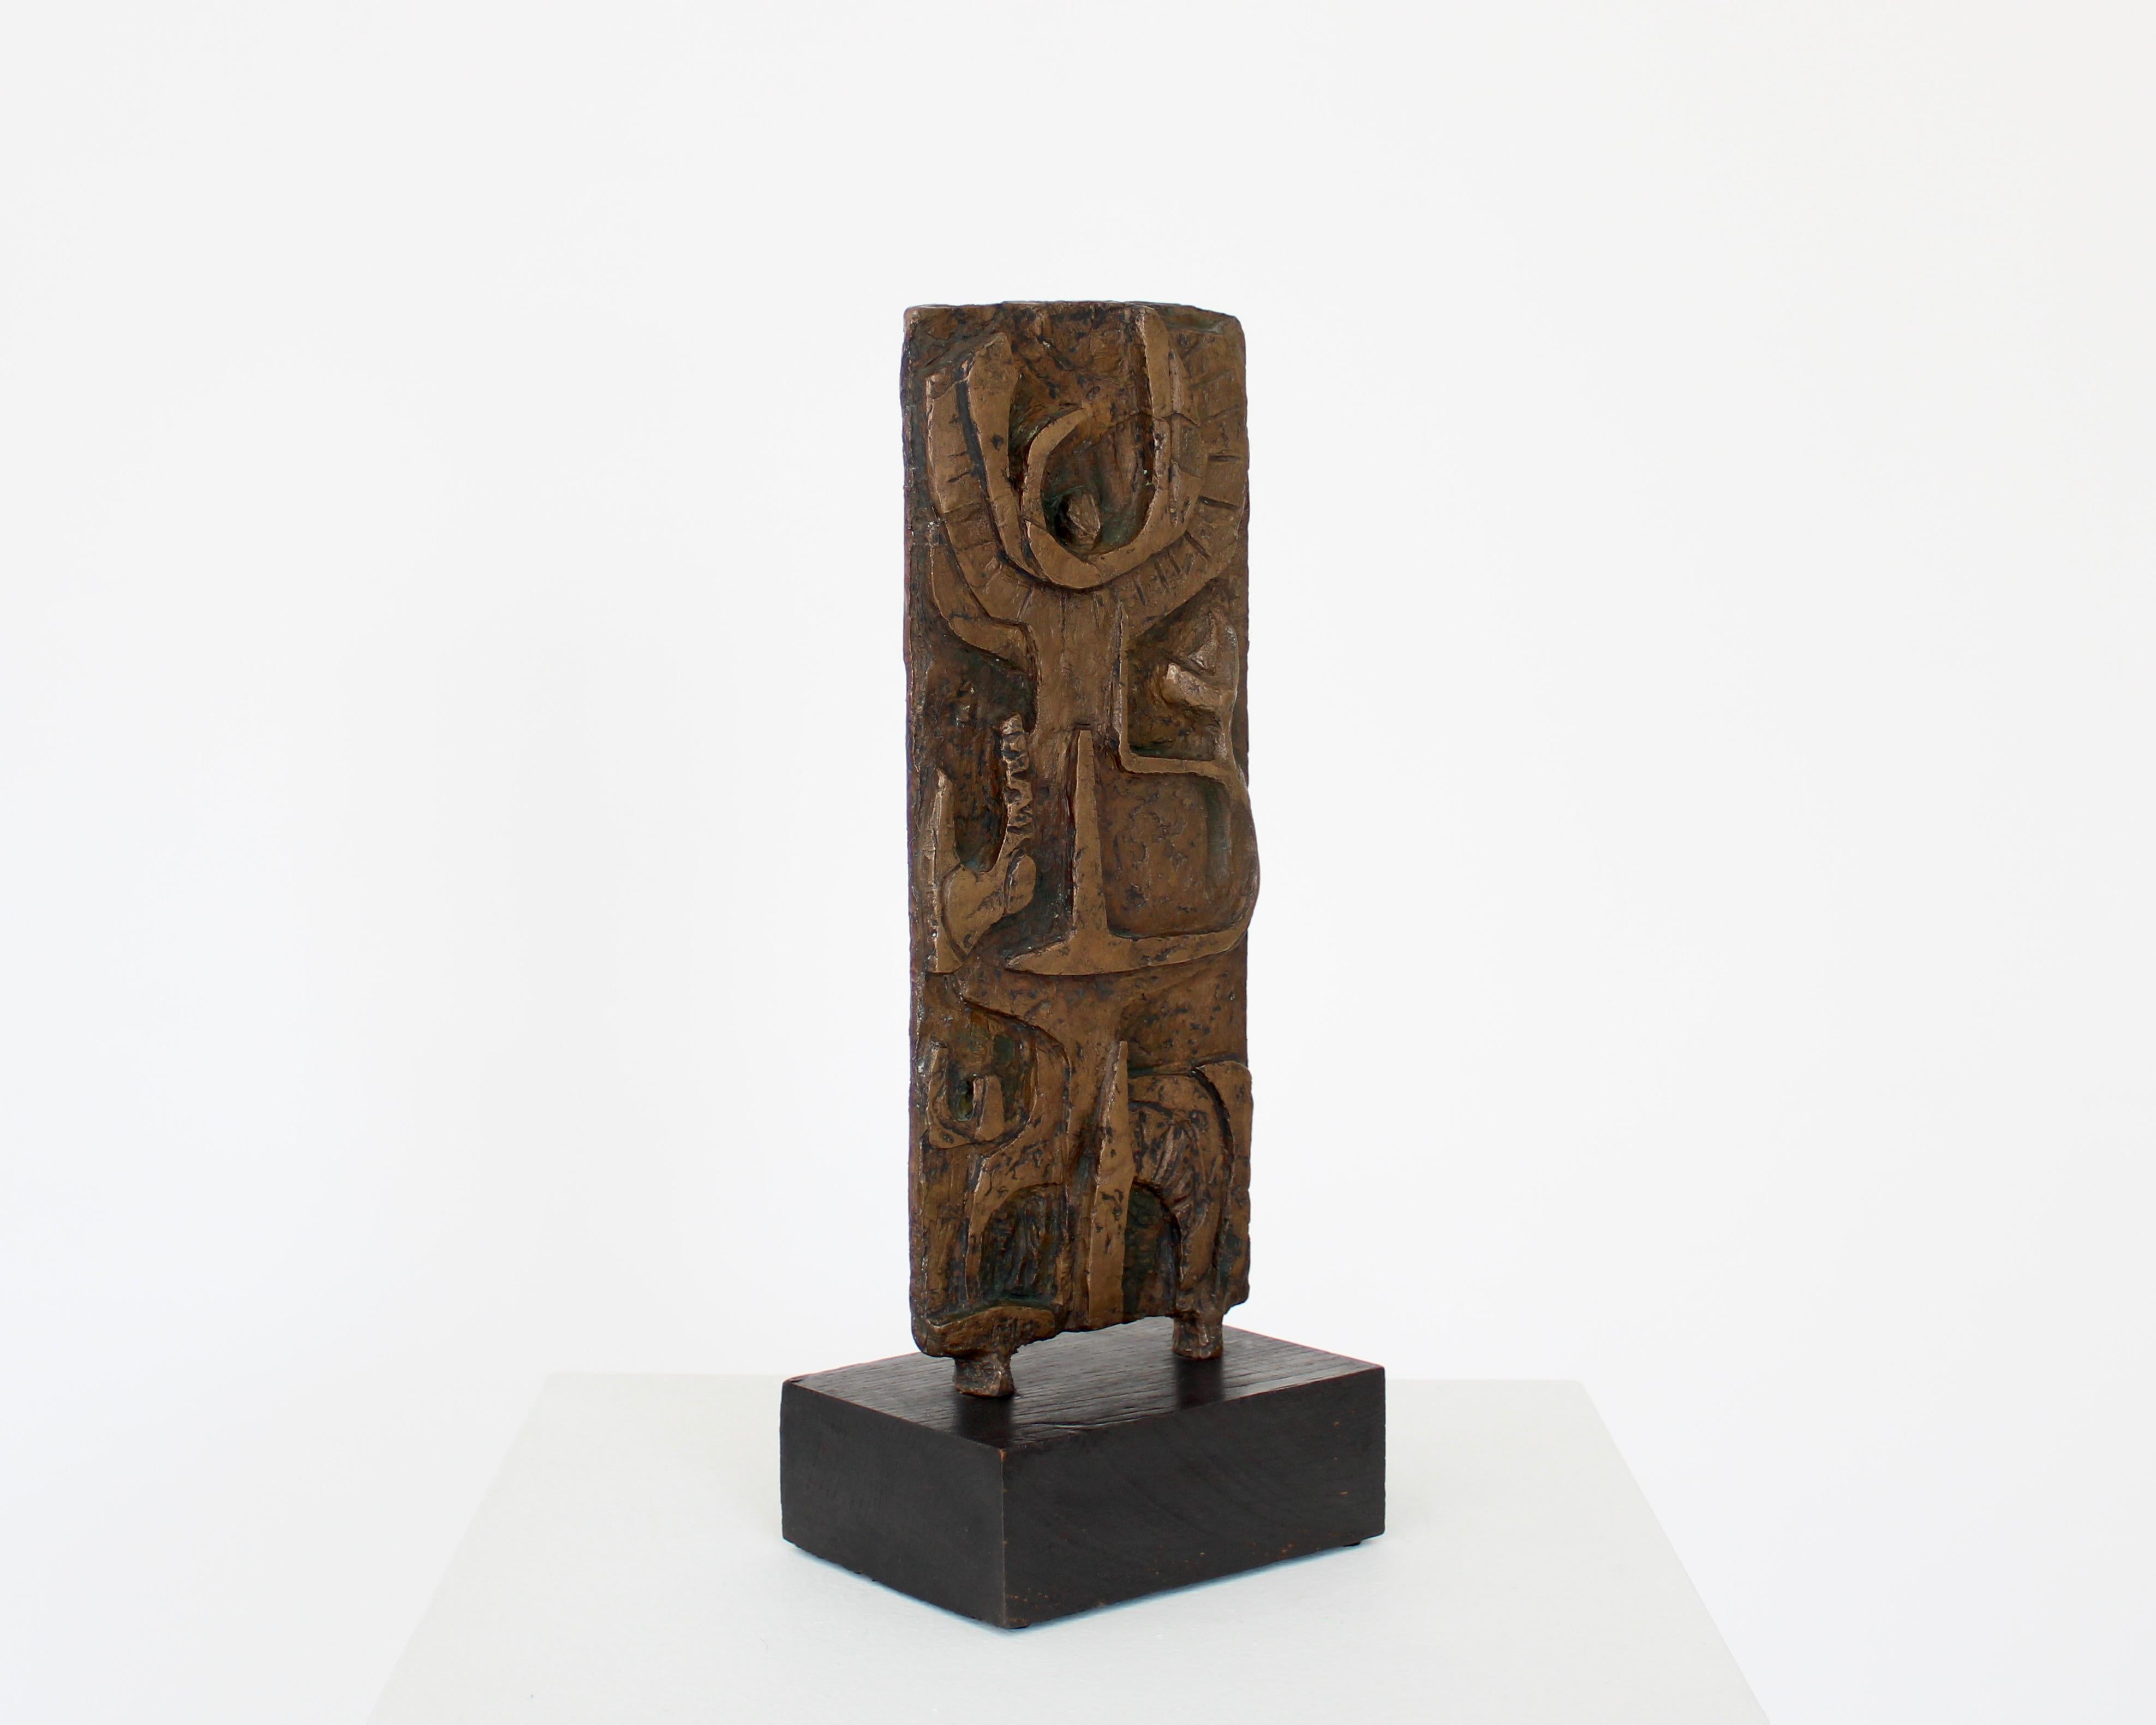 An Abstract animated figurative American bronze sculpture on black wood mount. 
Signed with MM on recto and verso. Unknown artist. 20th c
Very finely executed and animated with deep attention to detail of the various figurative motifs. 
Orignal